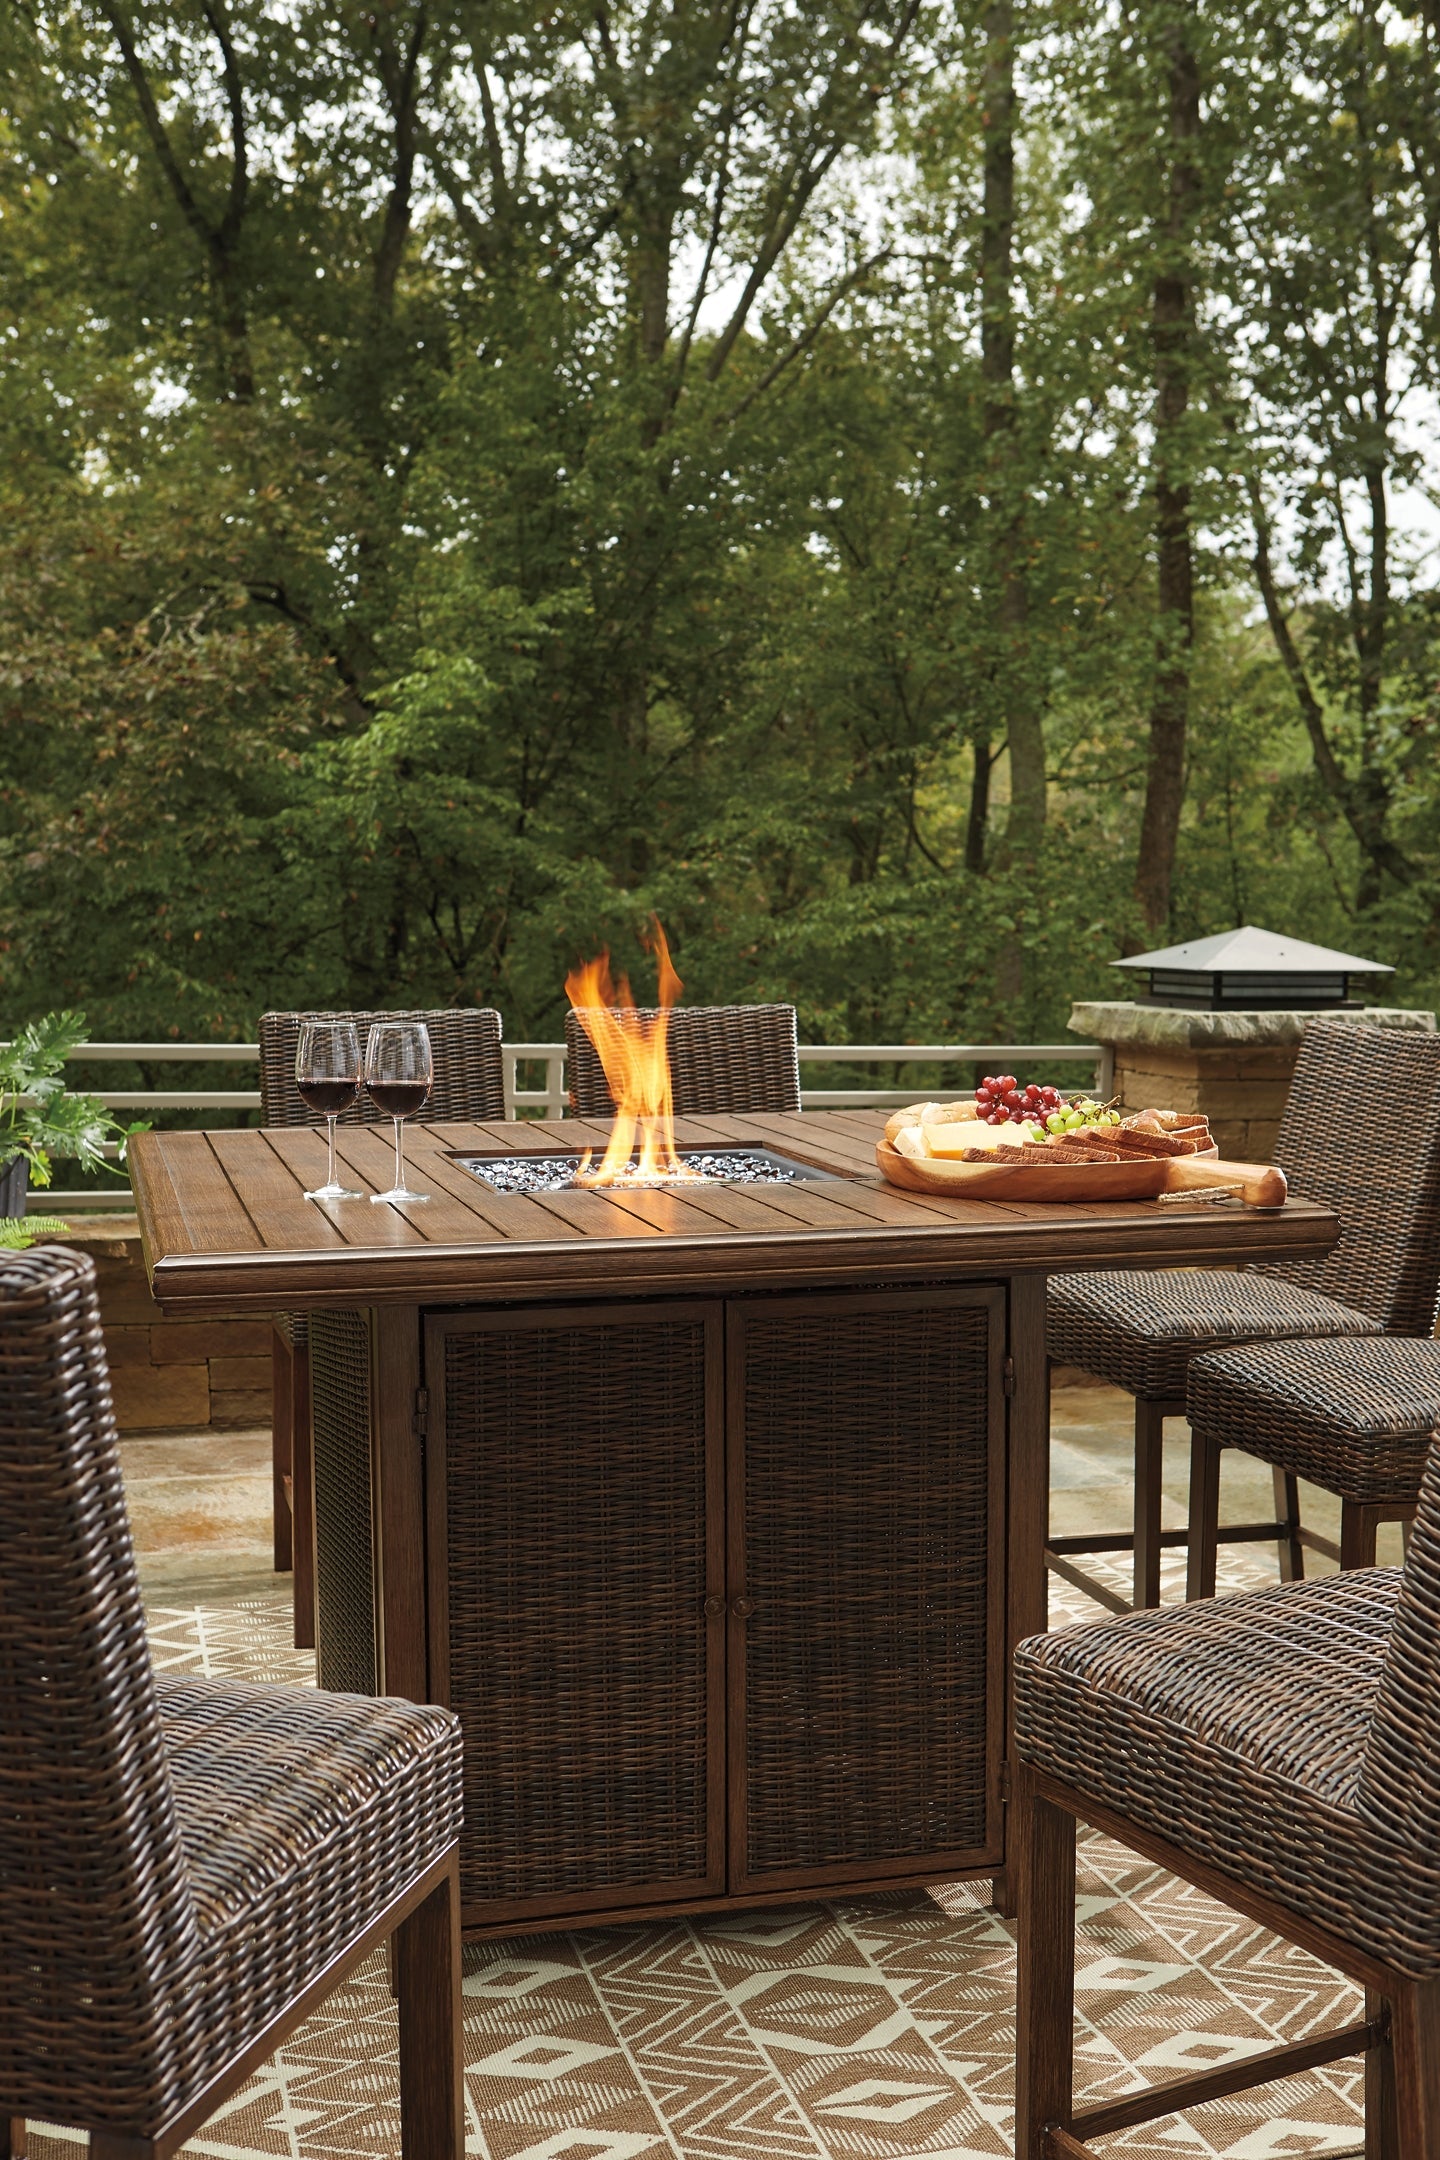 Paradise Trail Outdoor Dining Table and 6 Chairs